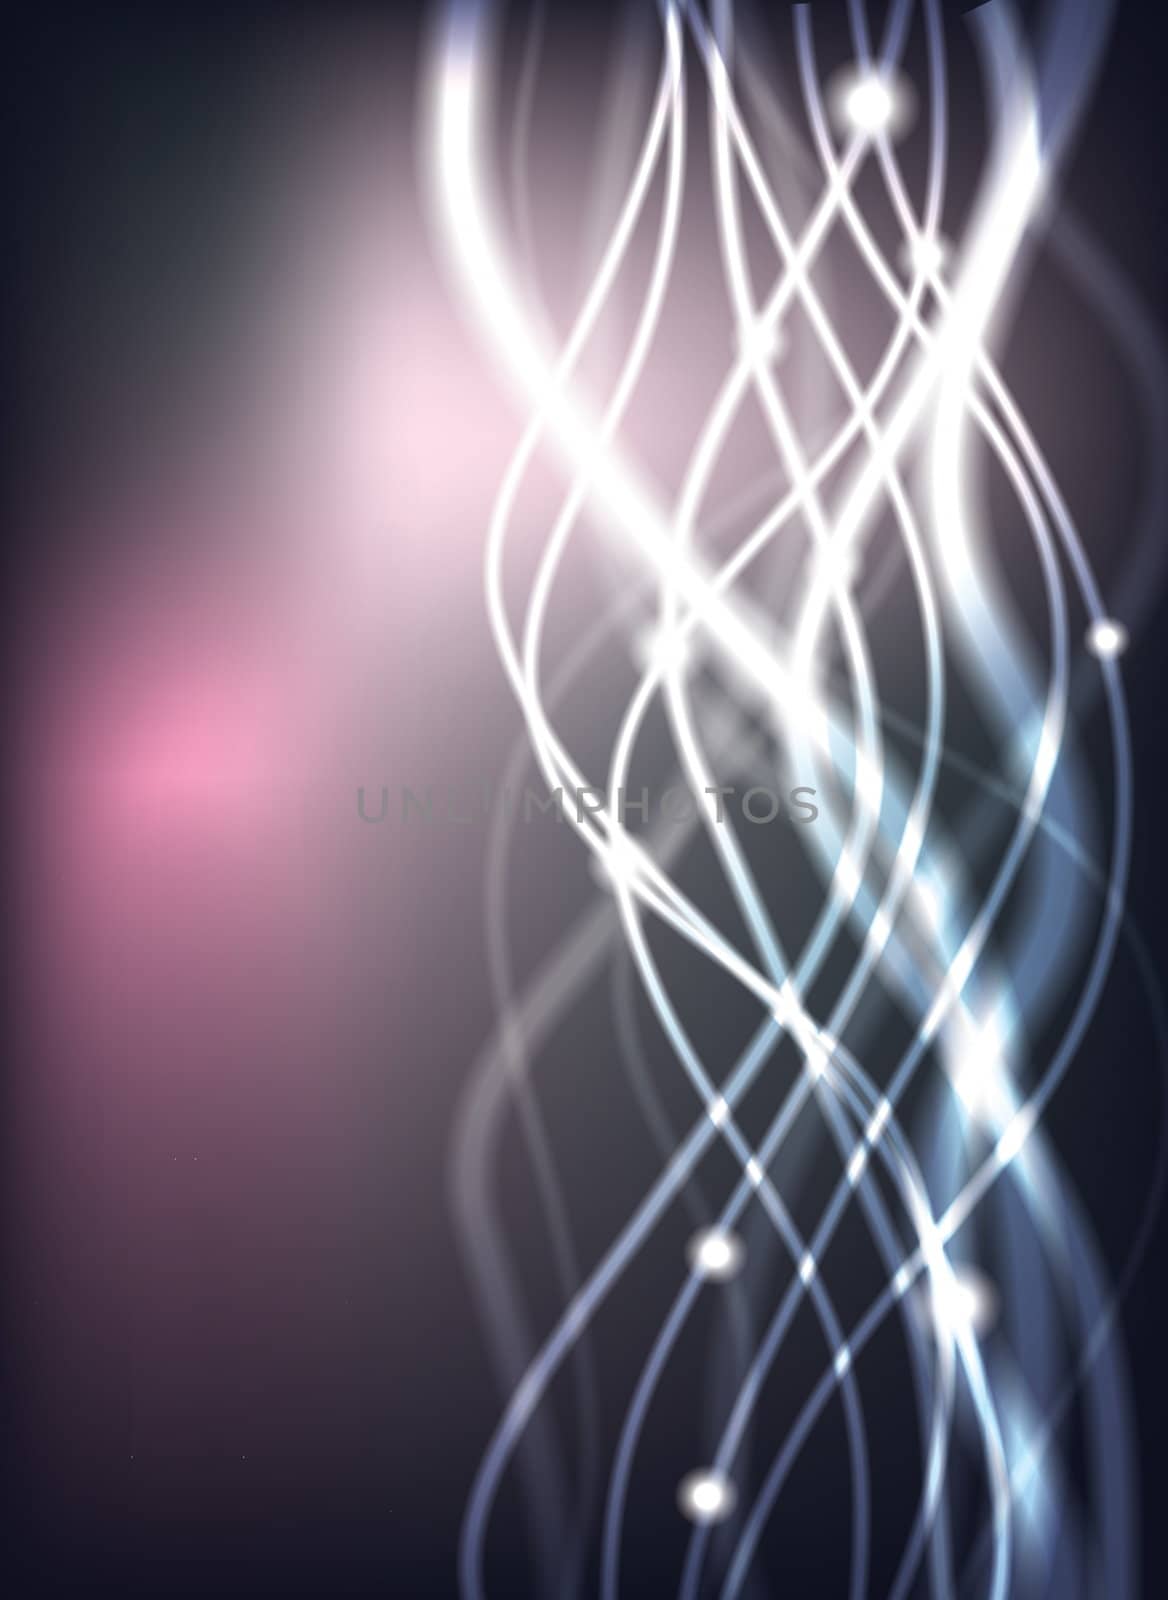 Blue Glowing Abstract Lines background, illustration for your design   by svtrotof